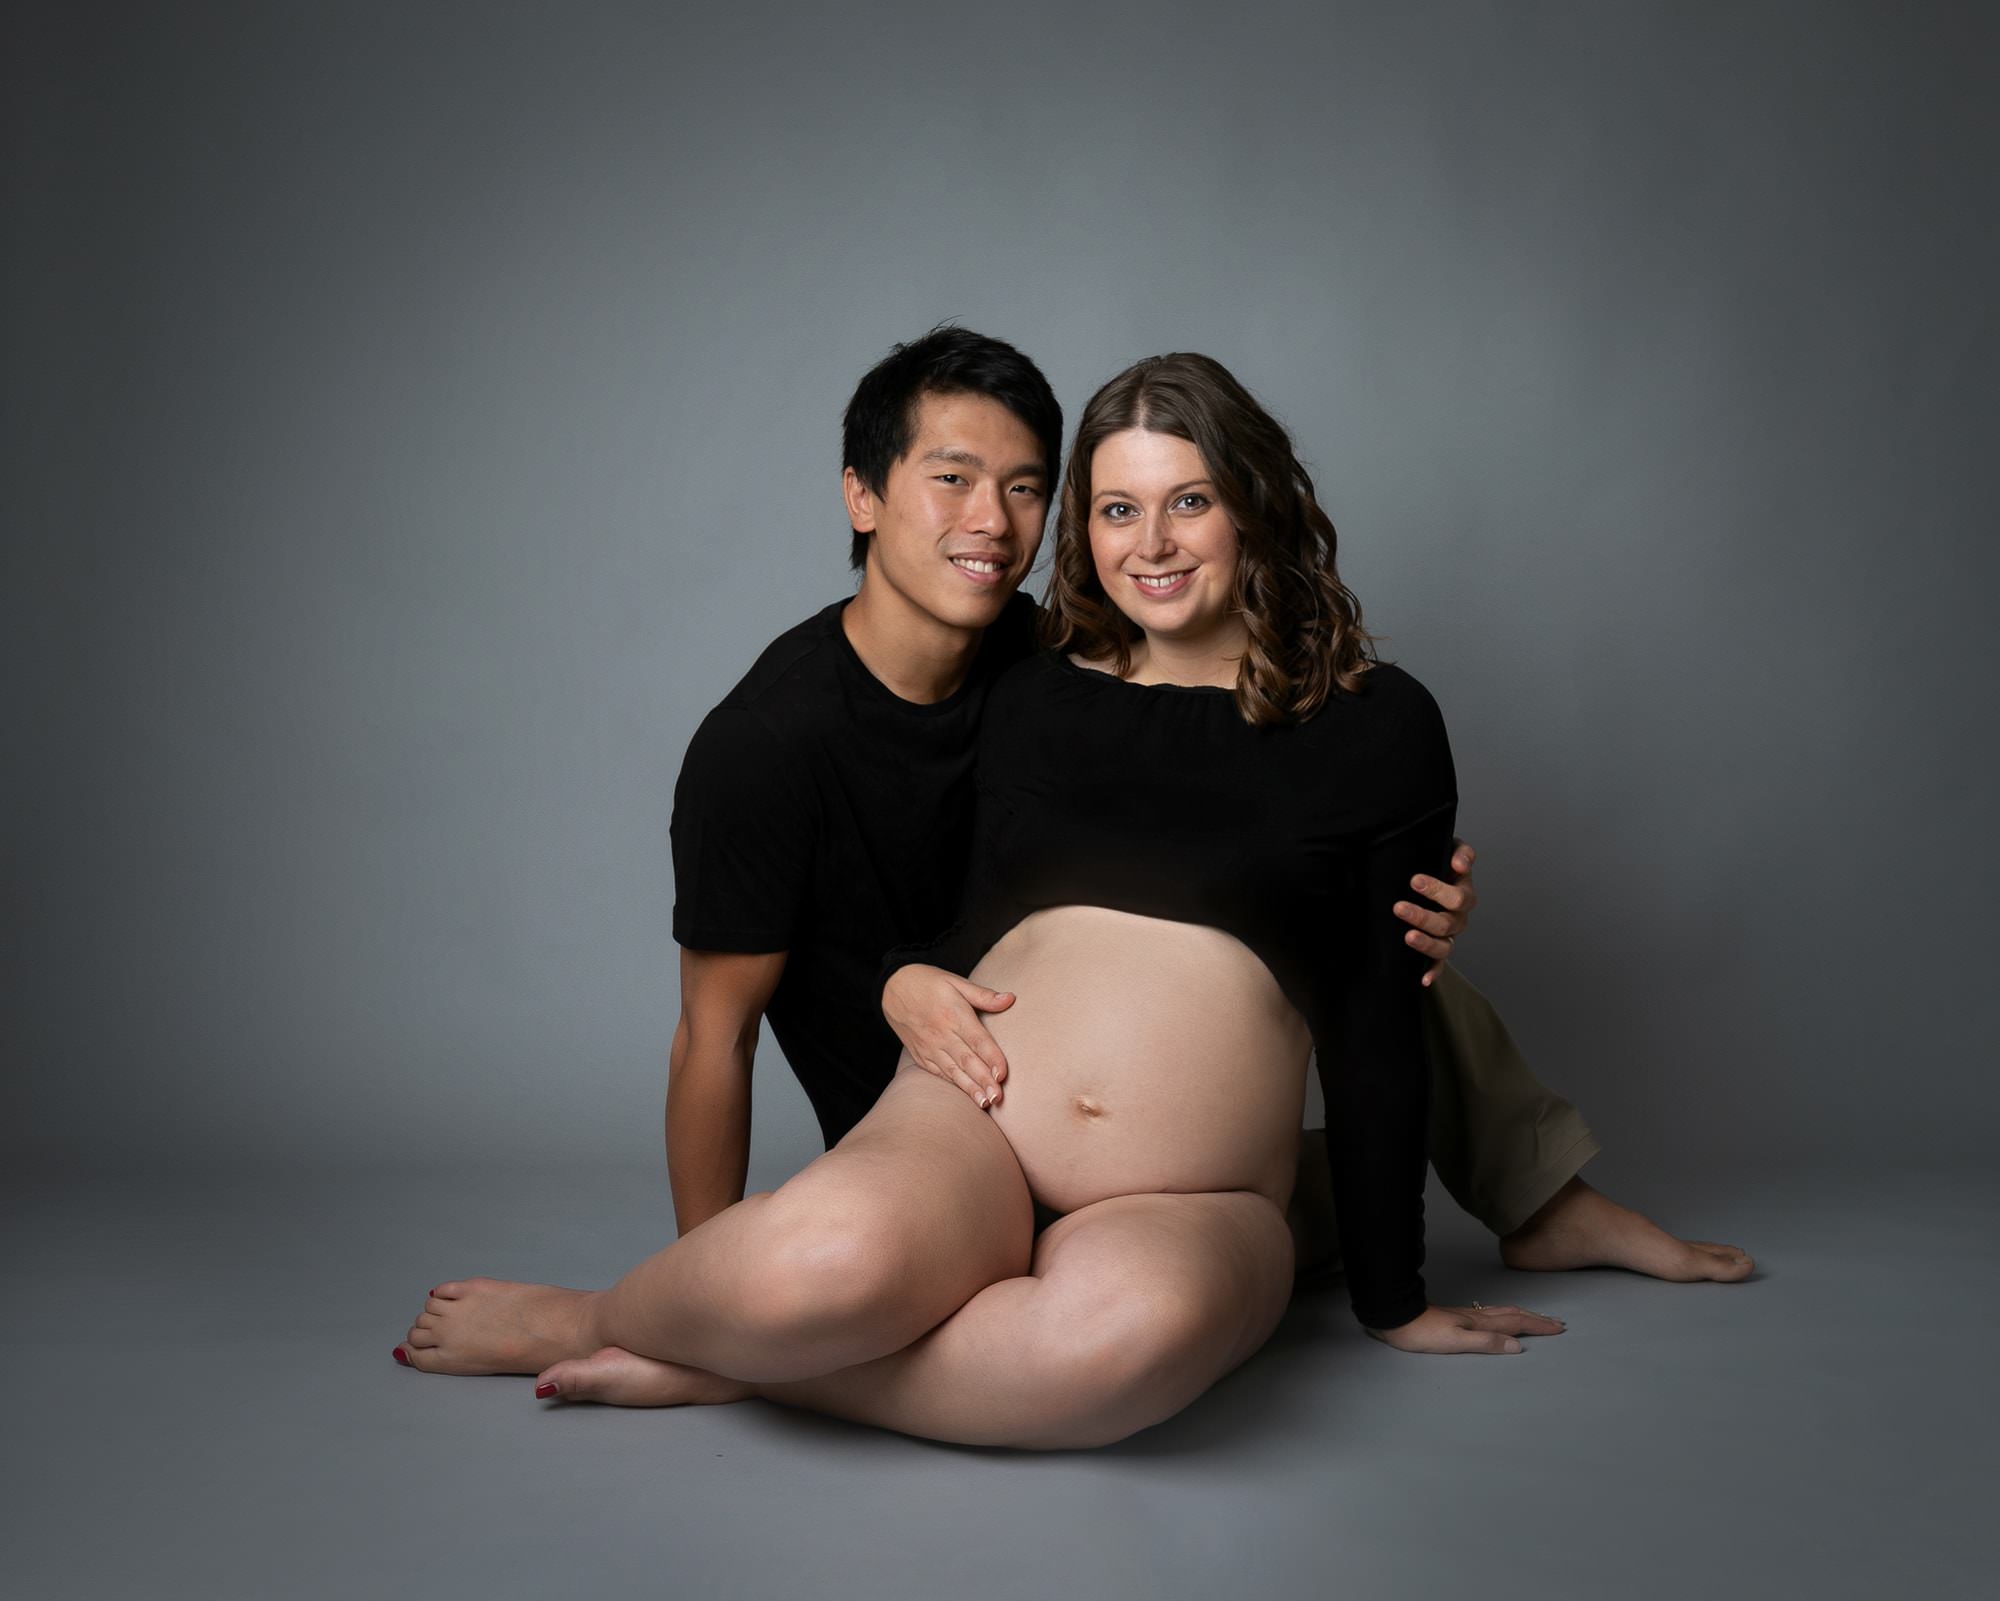 Male & female both wearing black tops, sitting on a grep backdrop. Female is pregnant and has baby bump on show. Both are smiling at the camera during their photoshoot. Image taken at Glasgow studio during maternity photography session